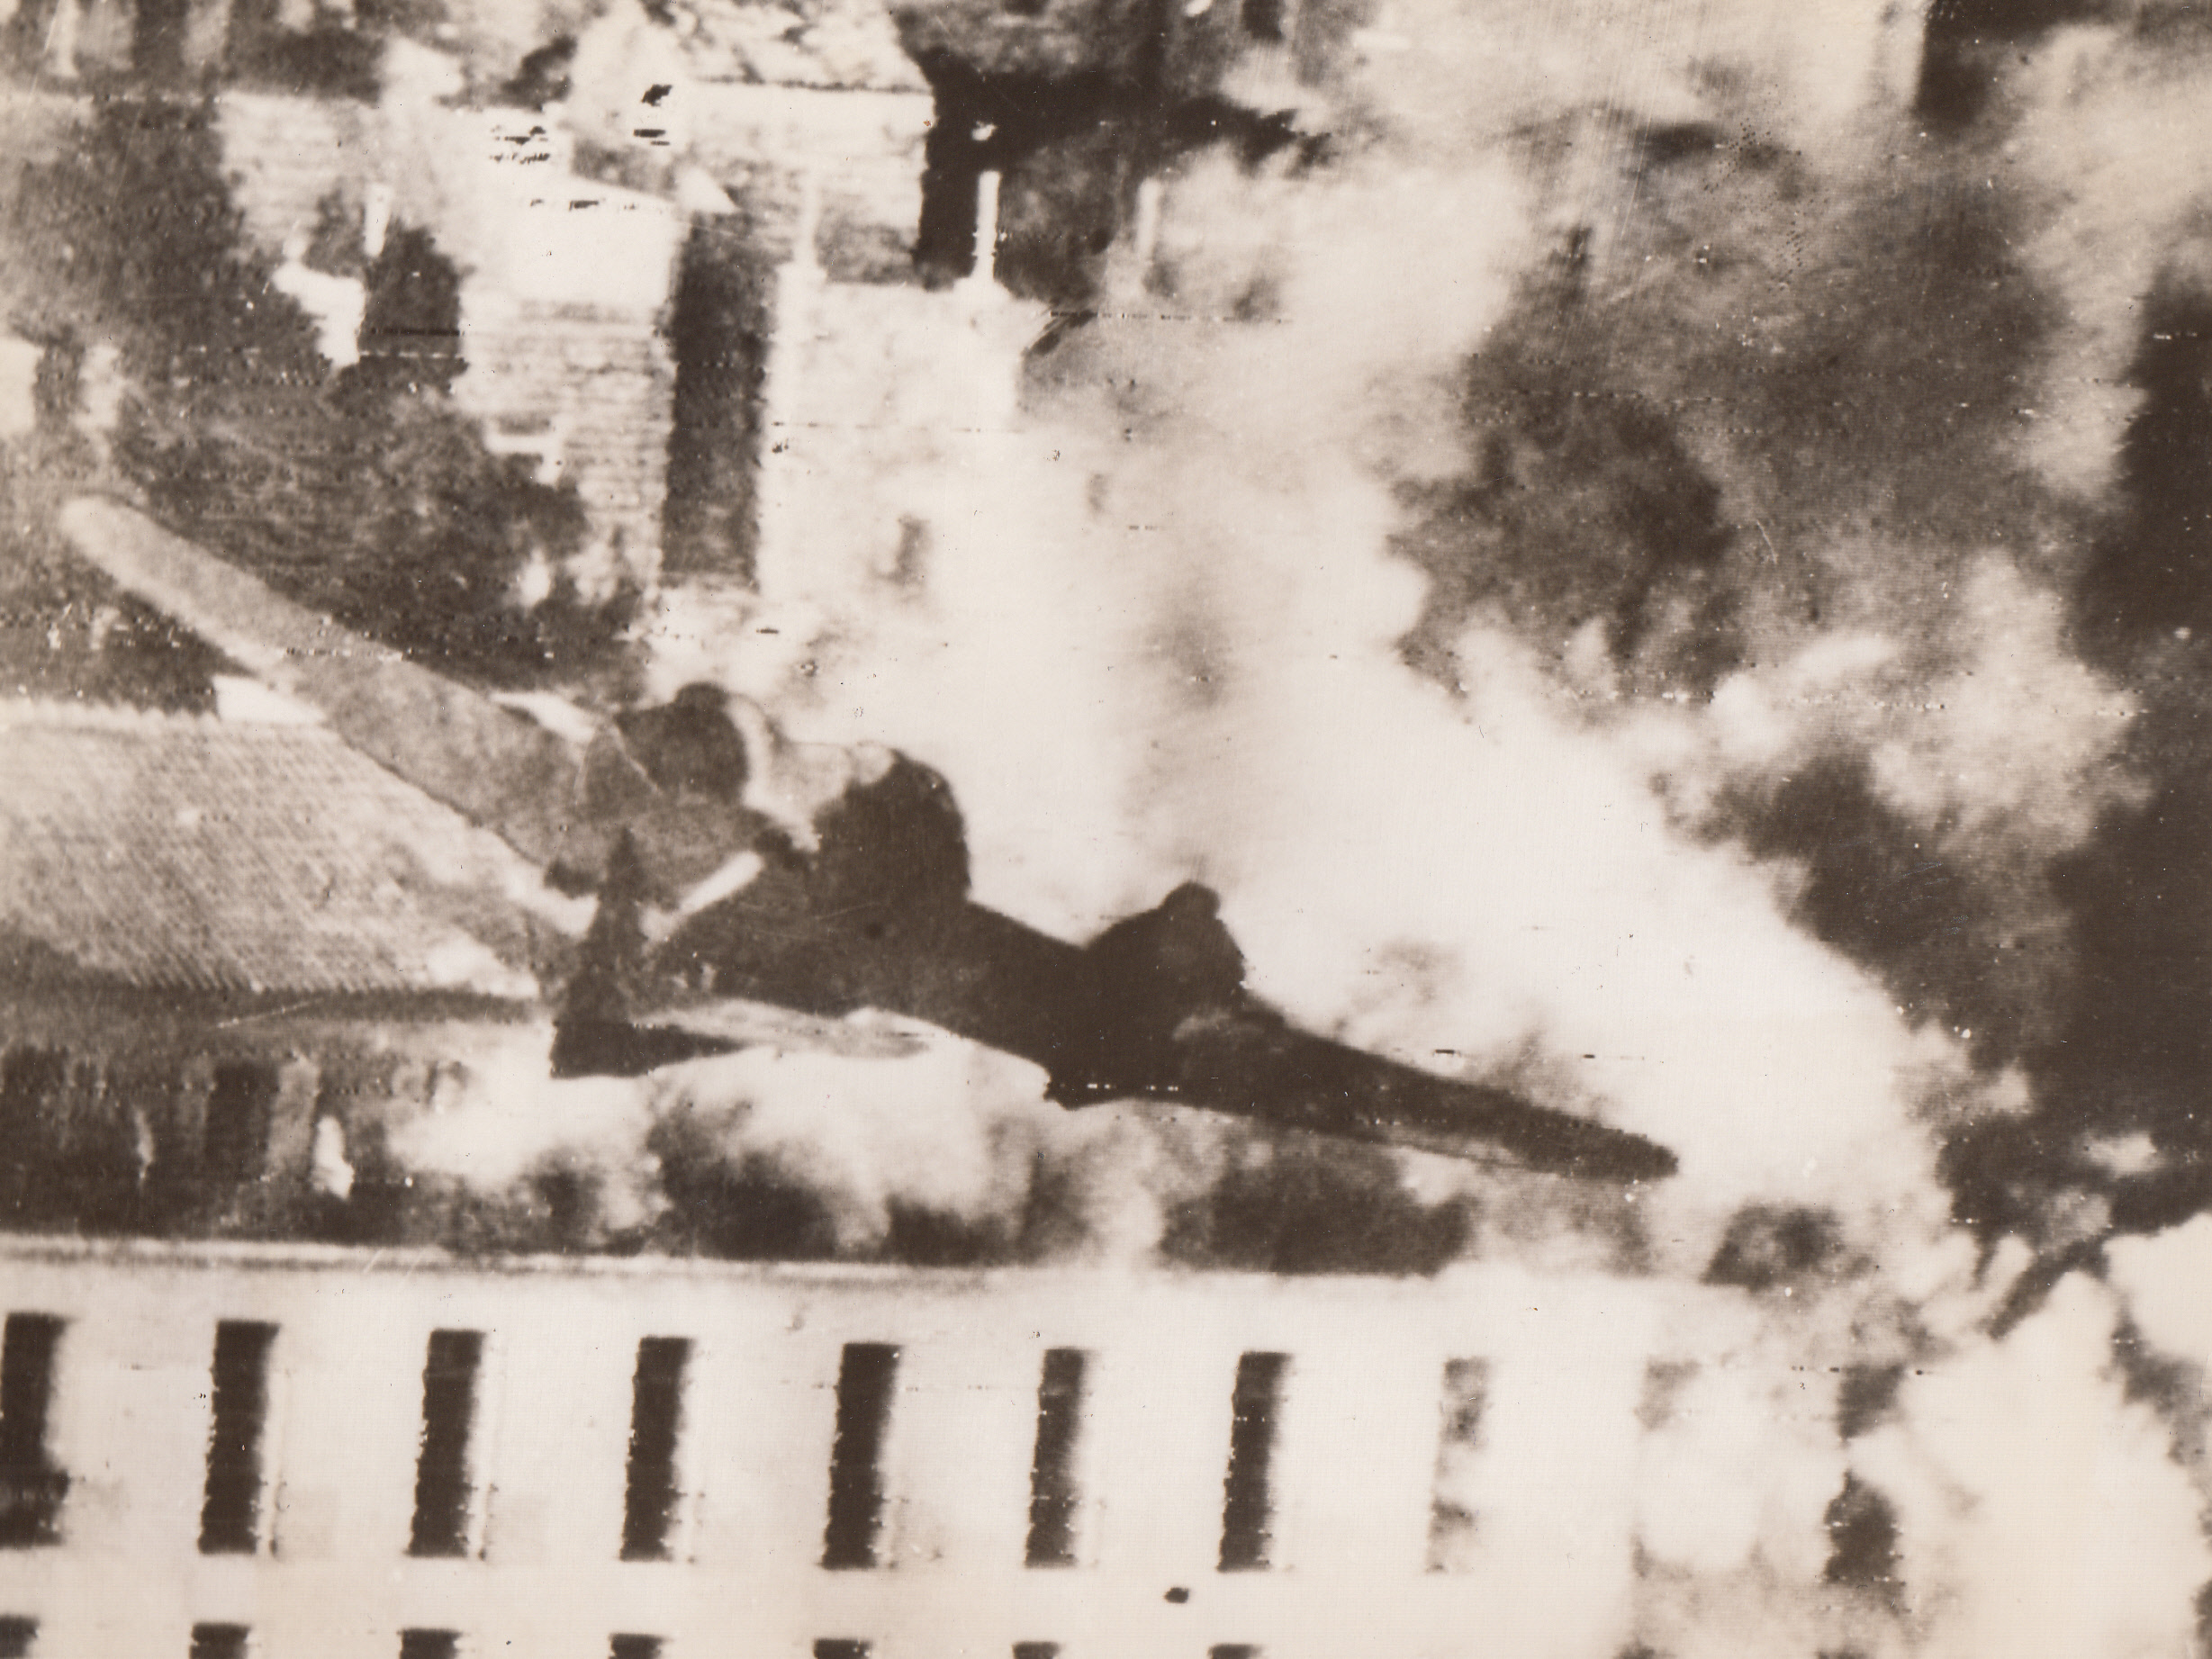 COMING IN A ROOF-TOP LEVEL, 8/22/1944. YUGOSLAVIA—A rocket-carrying Beaufighter of the Balkan Air Force goes in at roof-top level to loose its cargo of destruction on the already smoking building, suspected of being German headquarters, in Dubrovnik, Yugoslavia.;